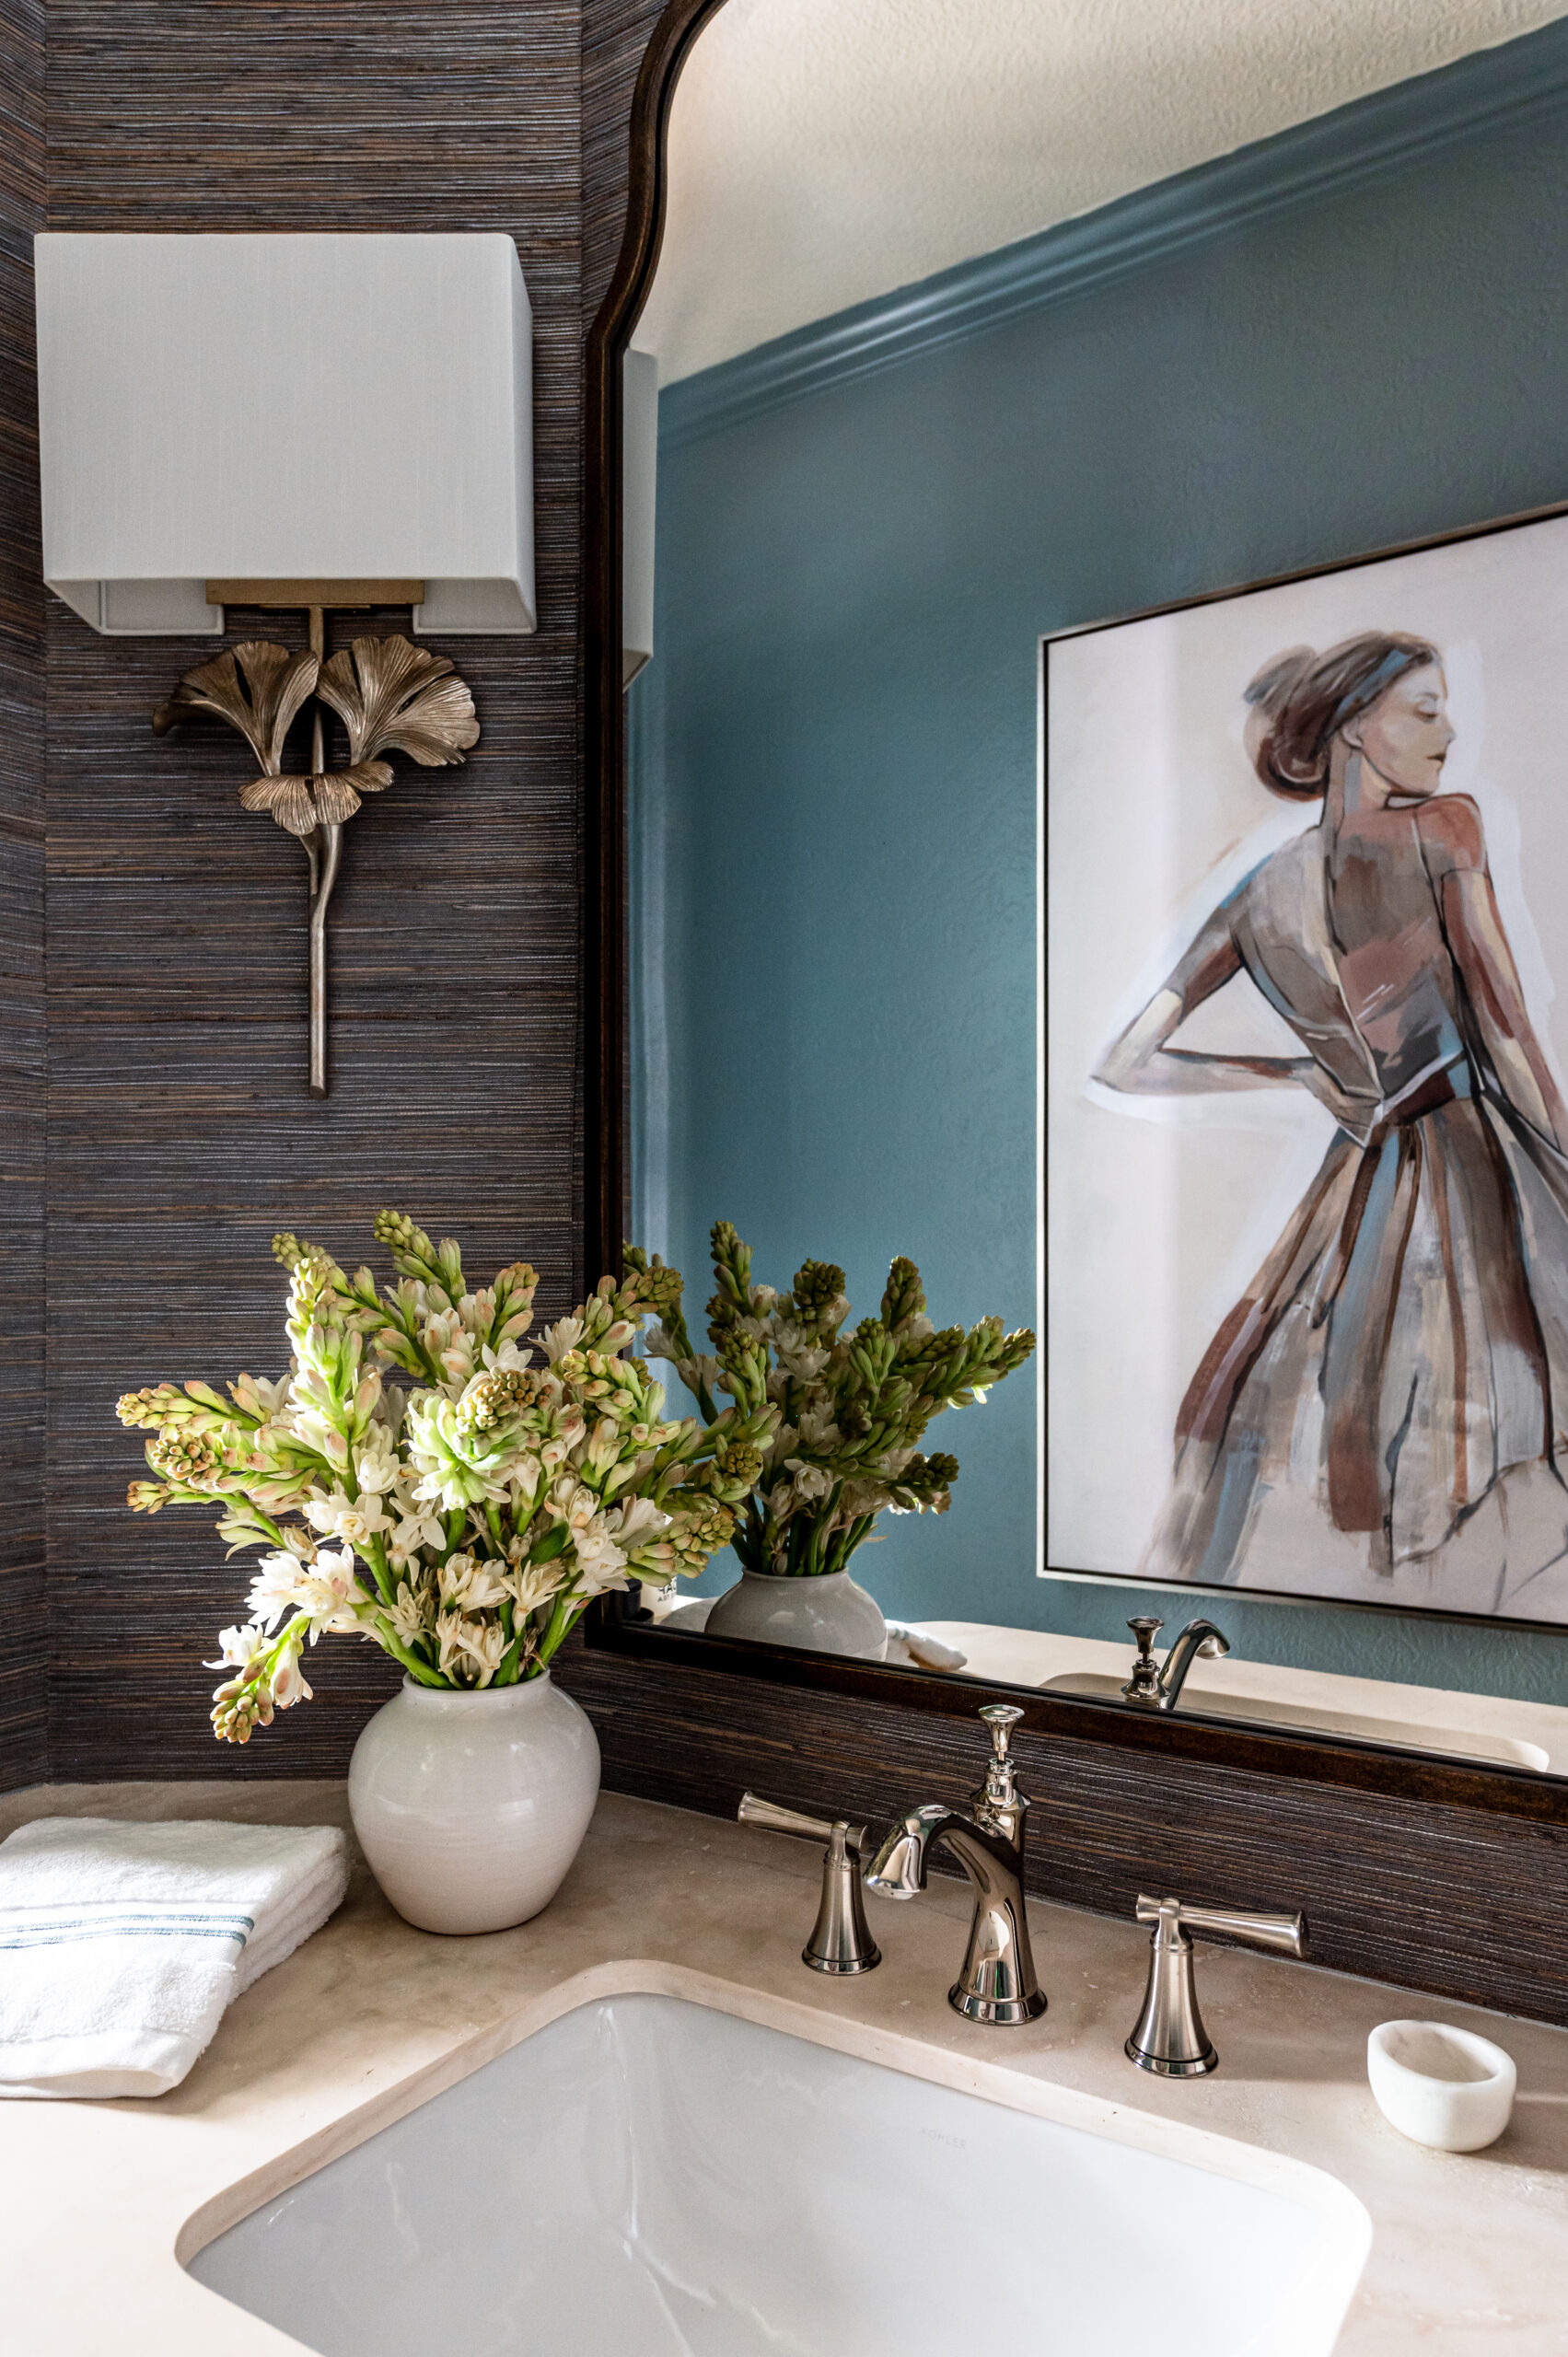 Beautiful interior design photos of a transitional old-world style bathroom